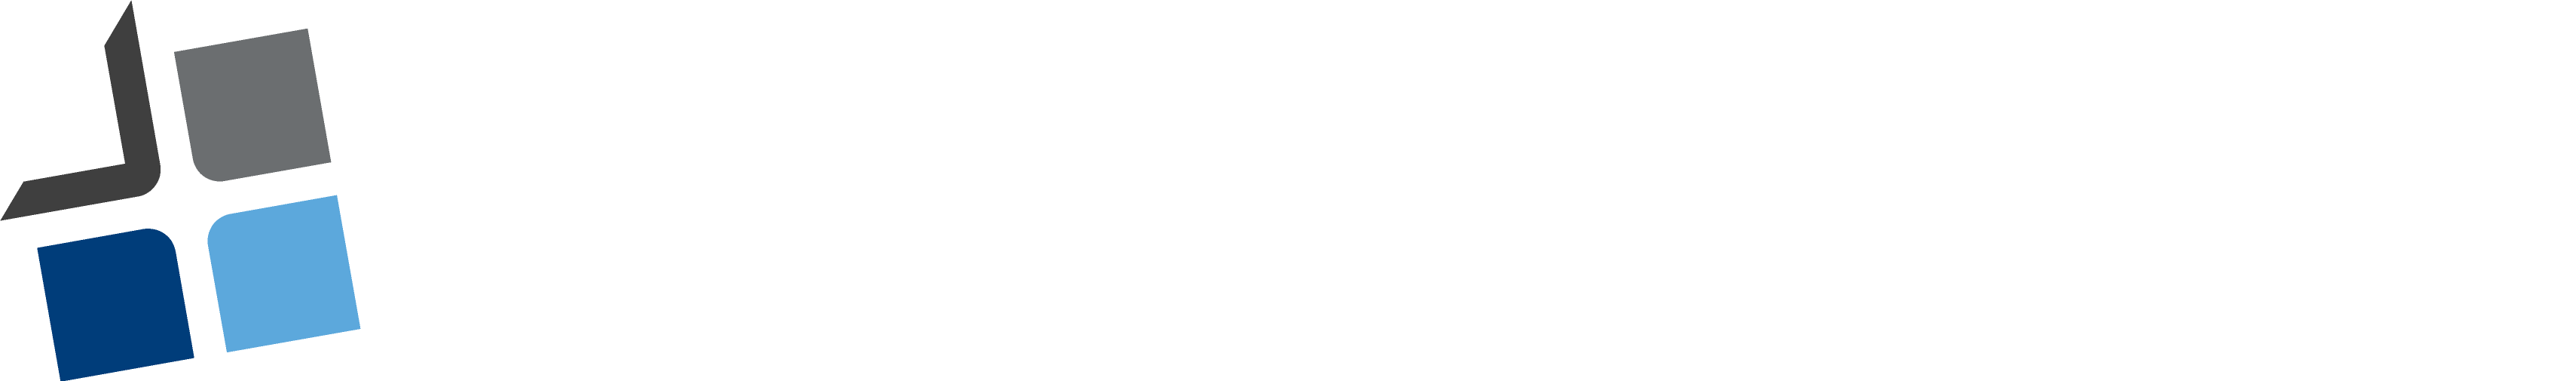 AGM Group Holdings| Nasdaq: AGMH | Bitcoin Miner | ASIC chip for Bitcoin | Blockchain and fintech applications